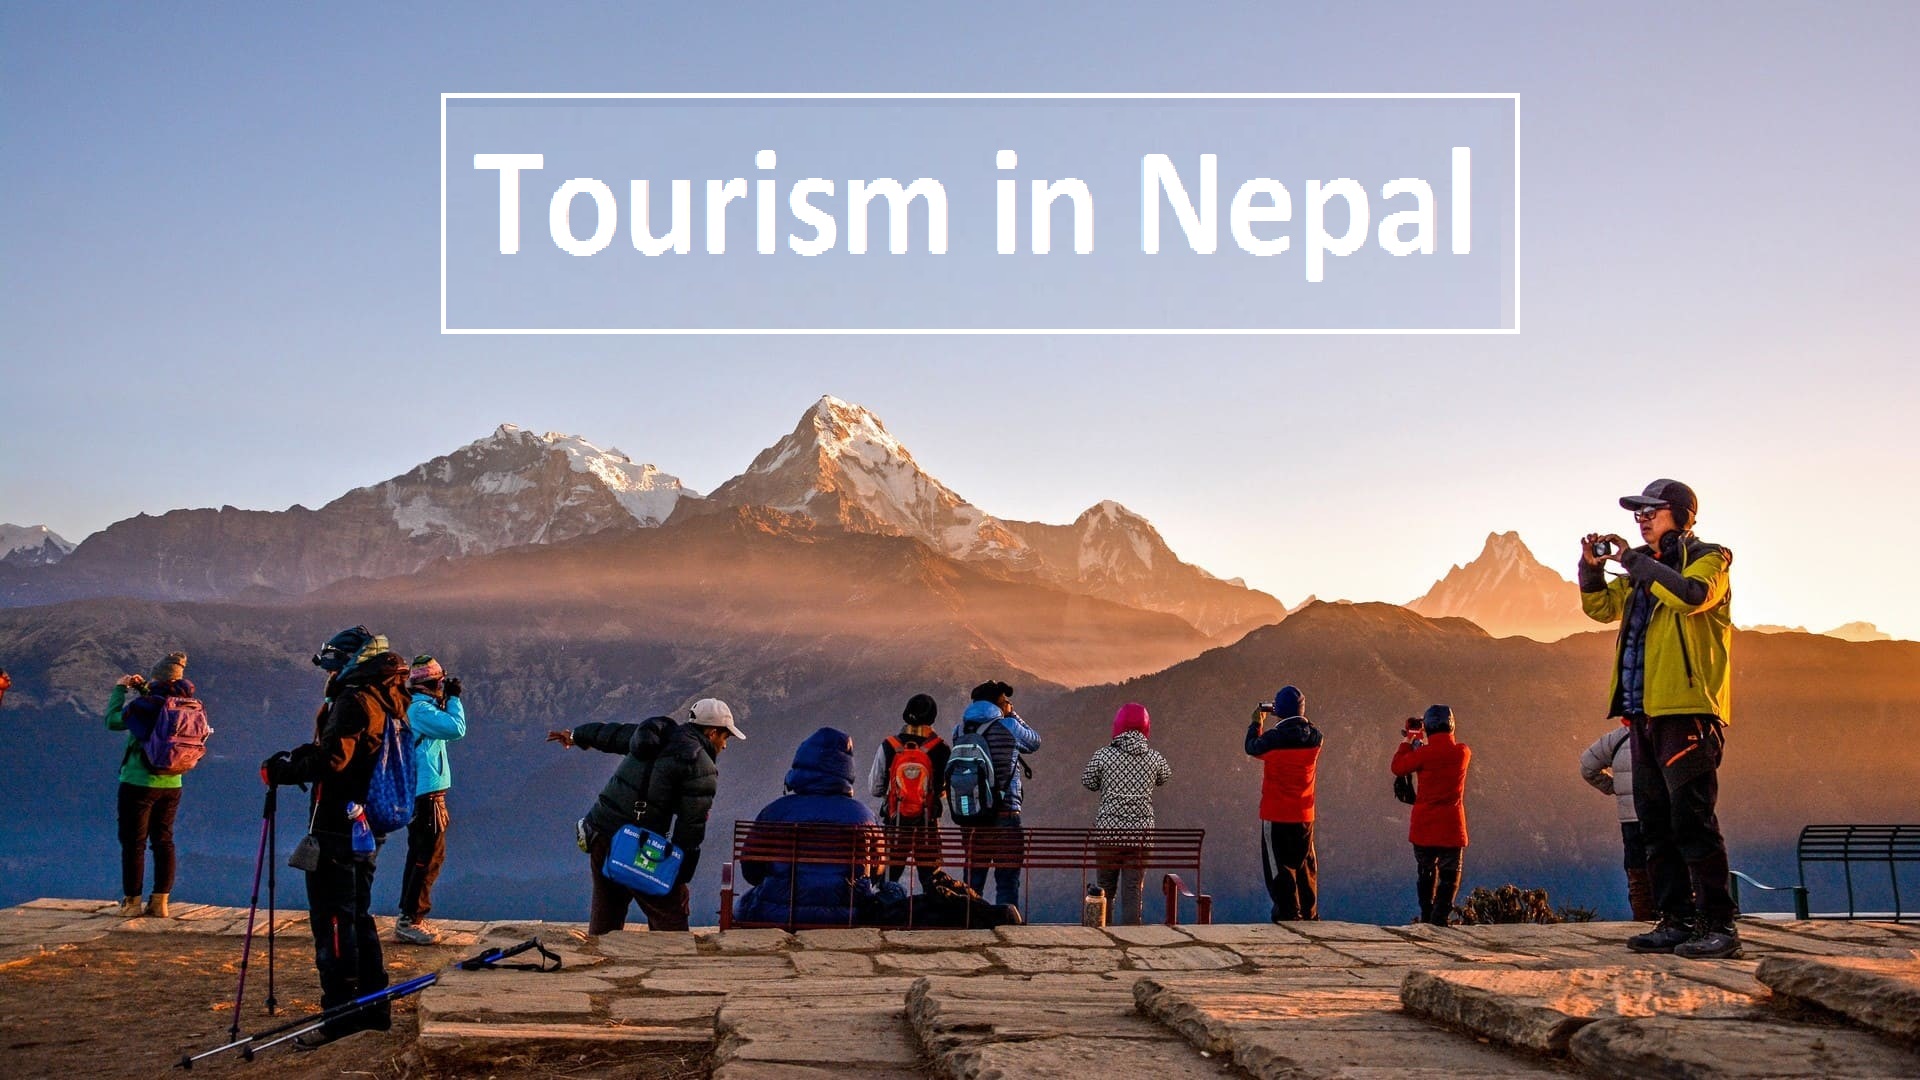 importance of tourism in nepal essay